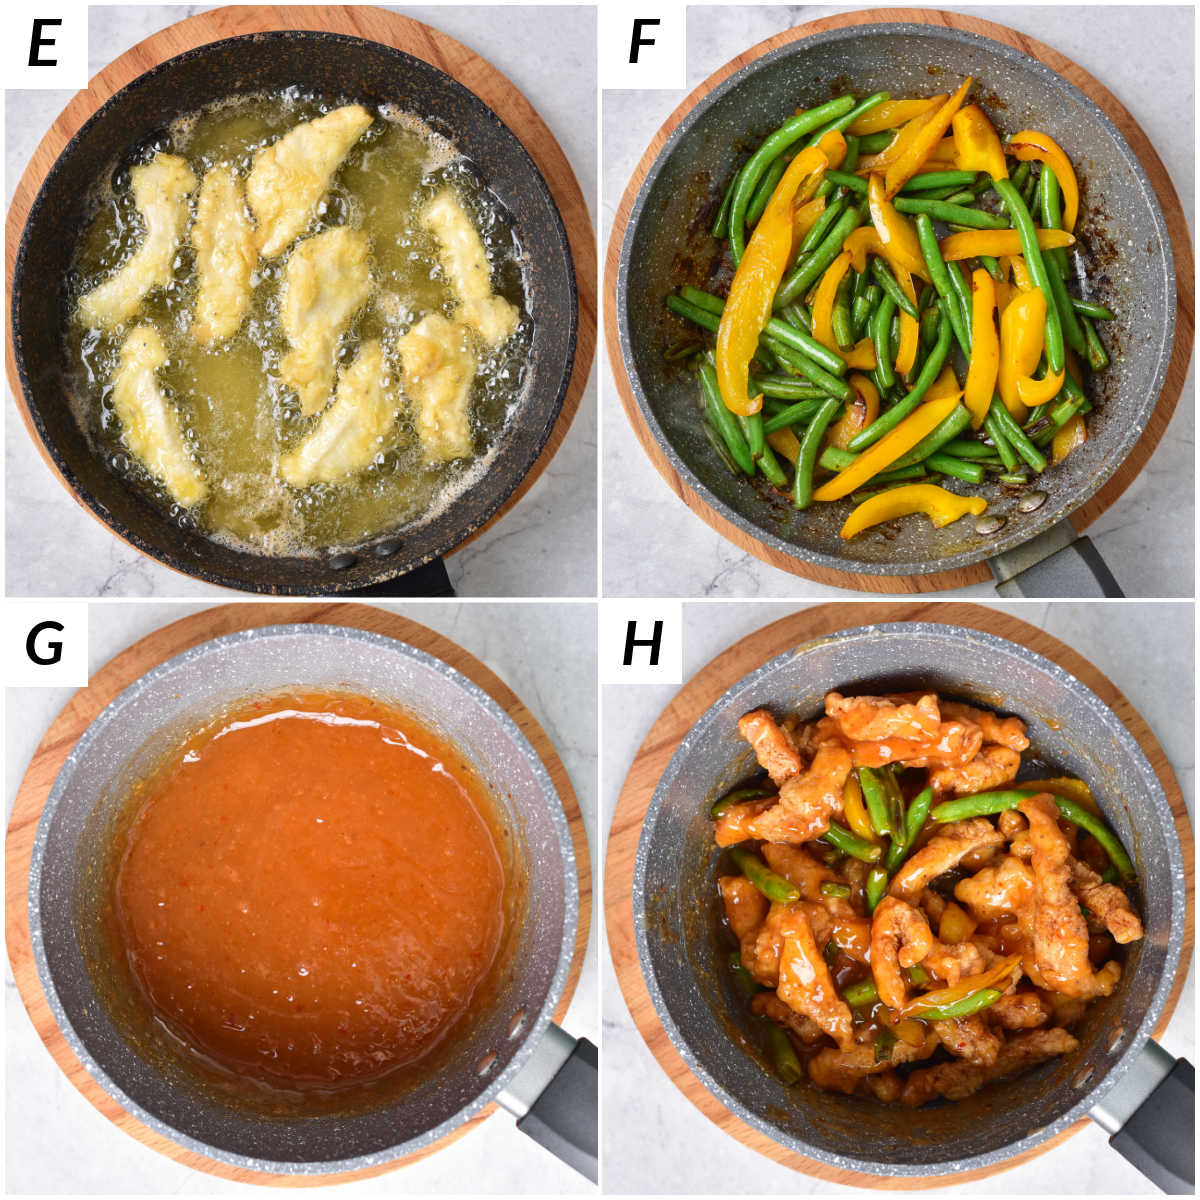 image collage showing the final steps for making honey sesame chicken